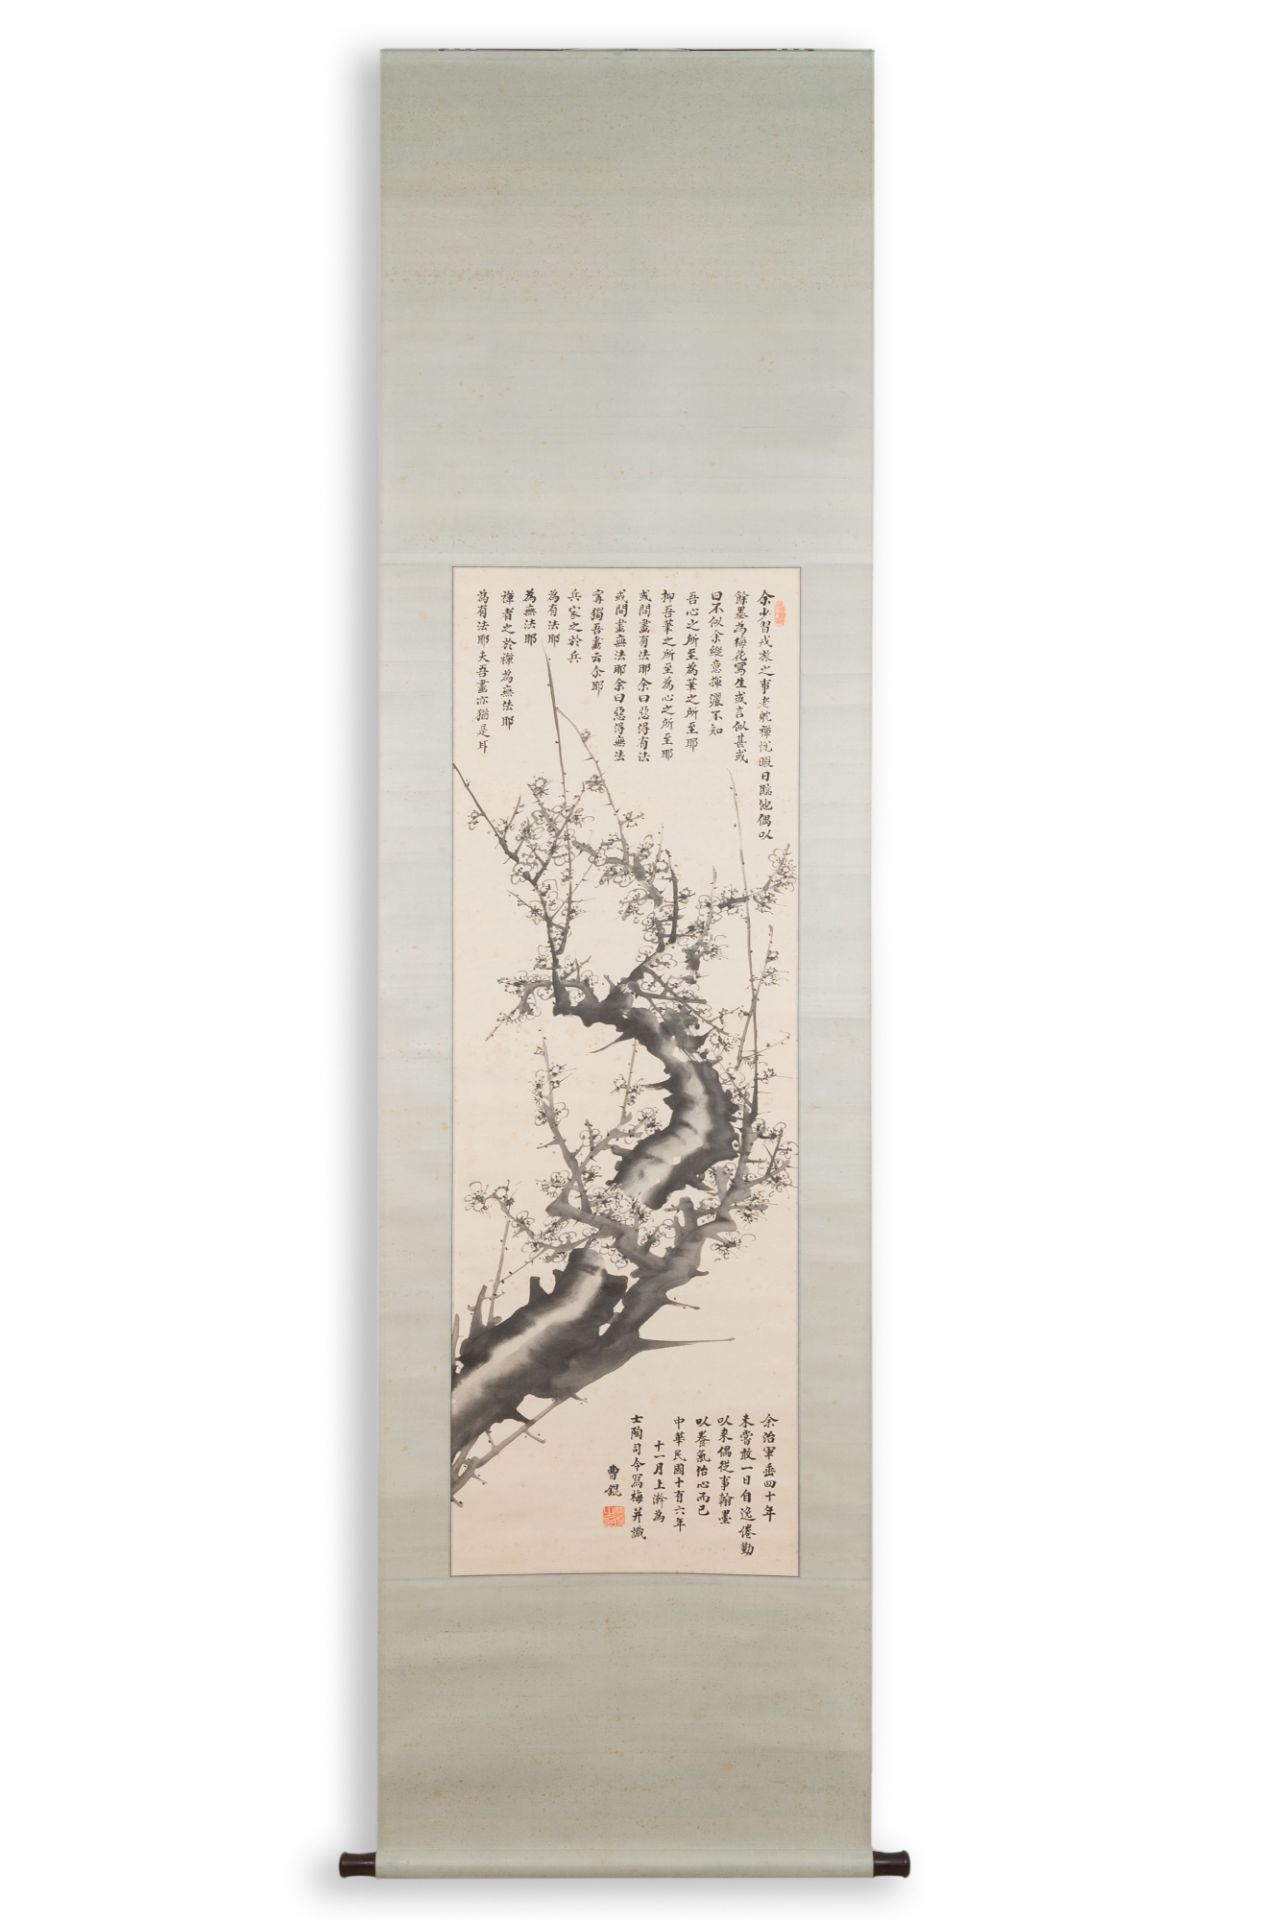 Cao Kun 曹锟 (1862-1938): 'Plum blossom', ink on paper, dated 1927 - Image 2 of 5